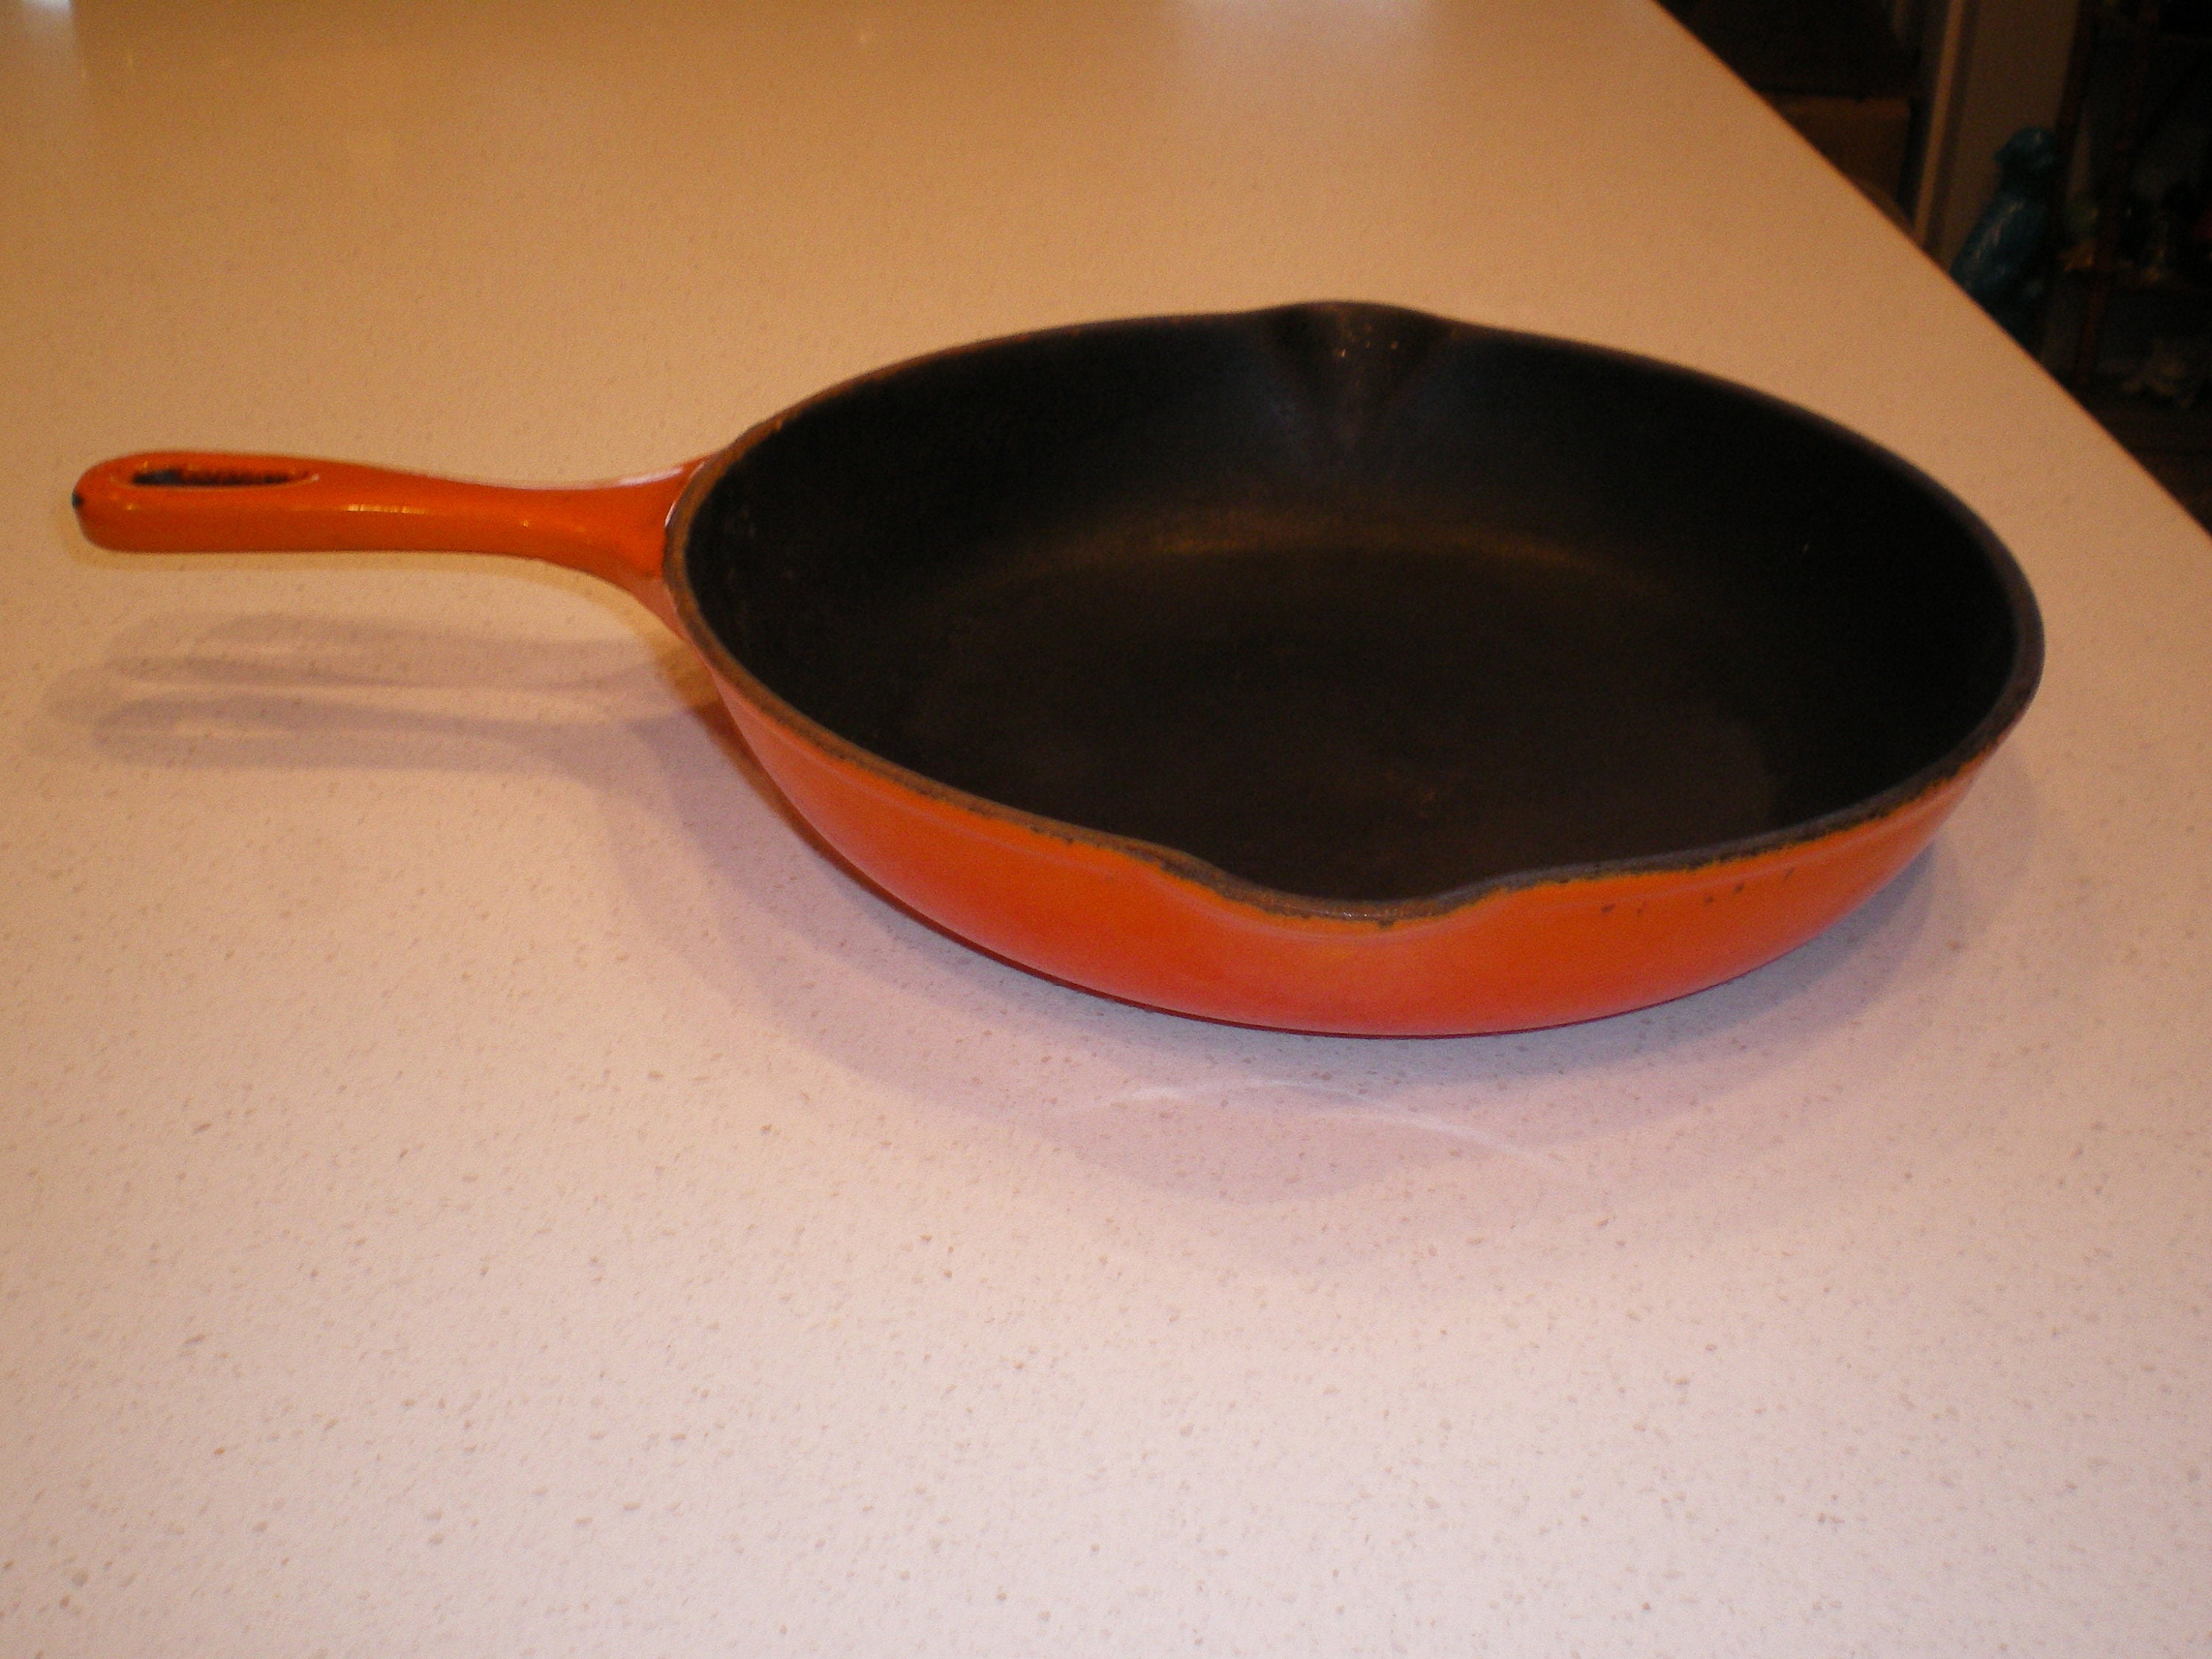 Le Creuset 23 enameled cast iron 9 inch skillet blue Free Ship Exc Cond￼